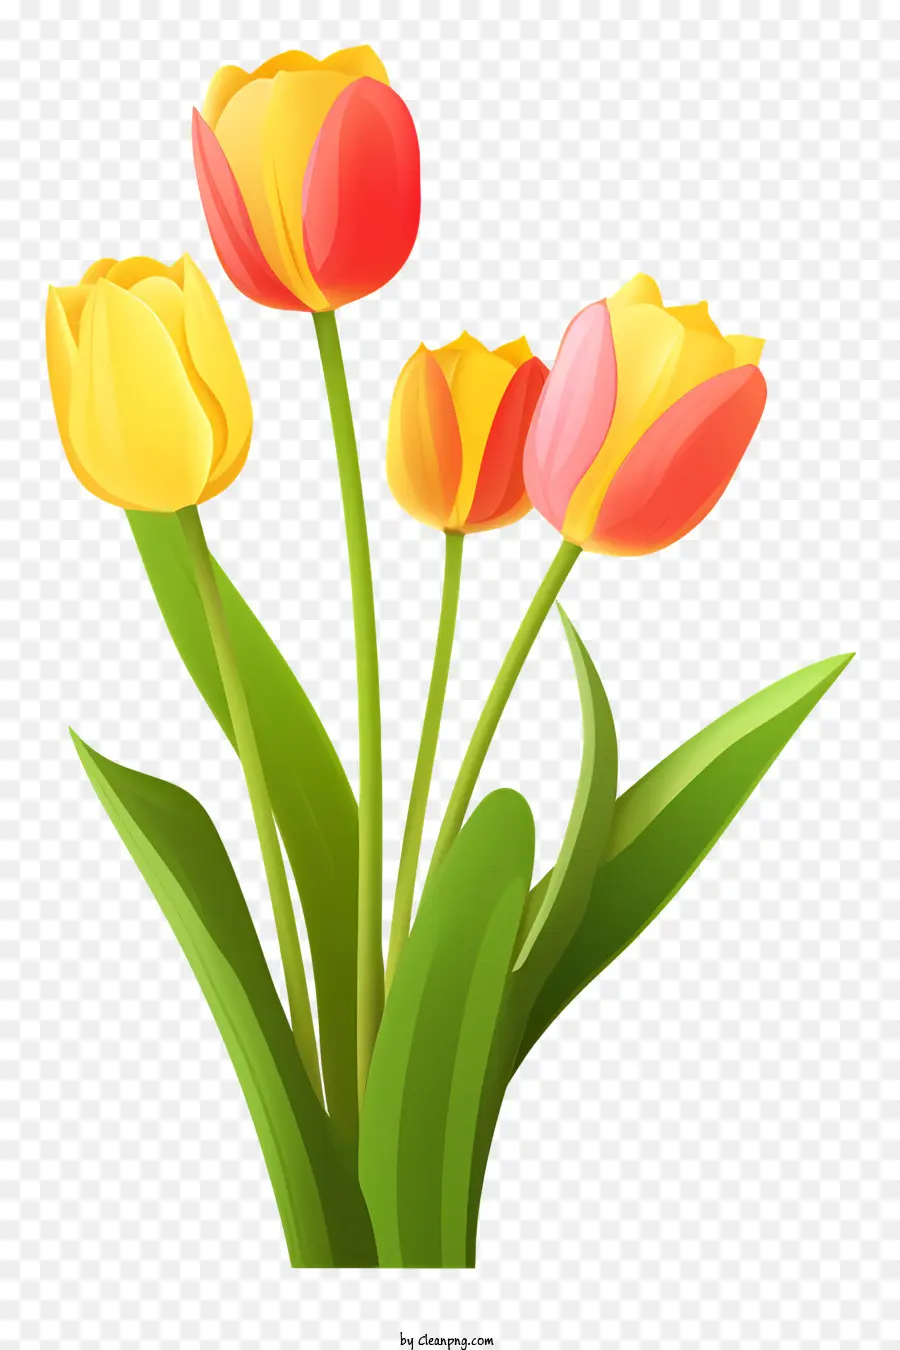 bouquet tulips yellow red vase